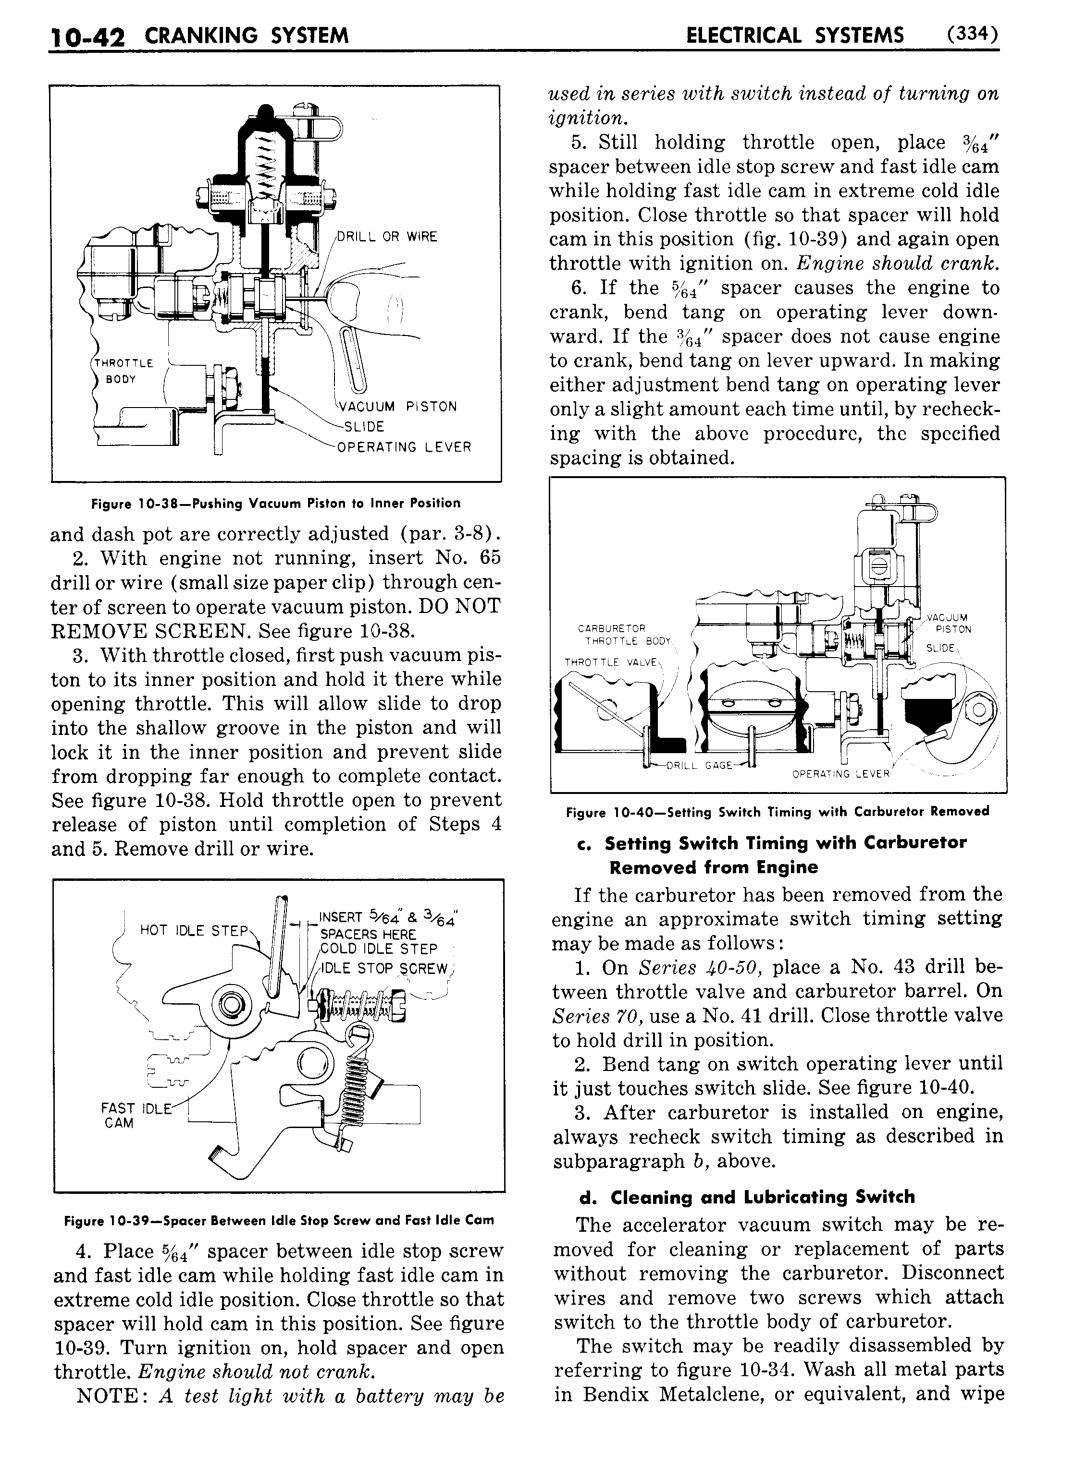 n_11 1951 Buick Shop Manual - Electrical Systems-042-042.jpg